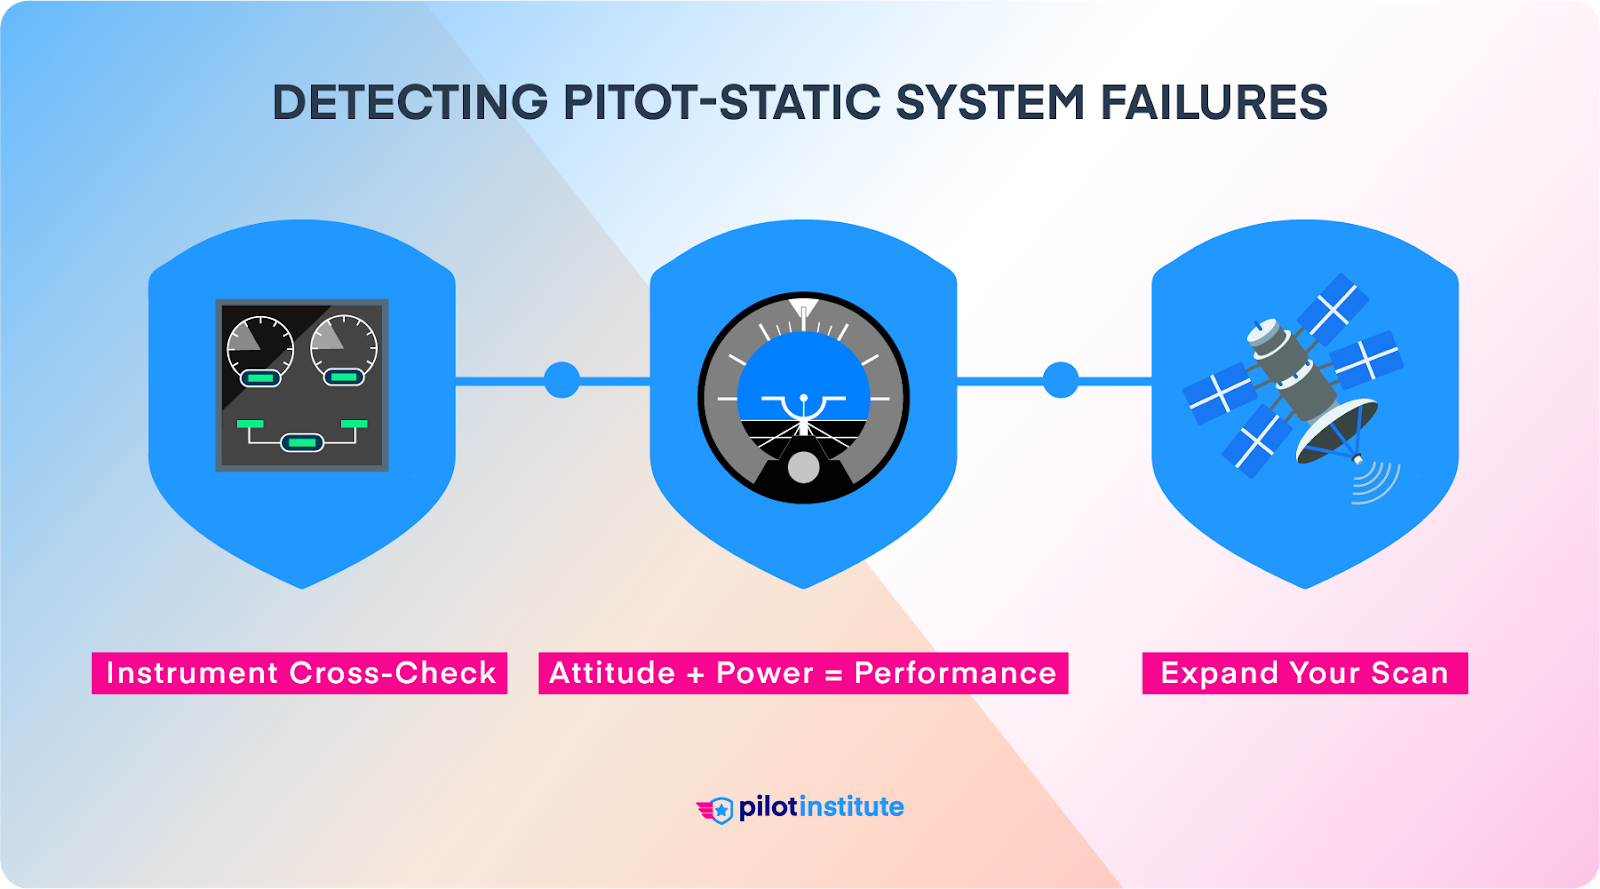 Infographic depicting how to detect pitot-static system failures.